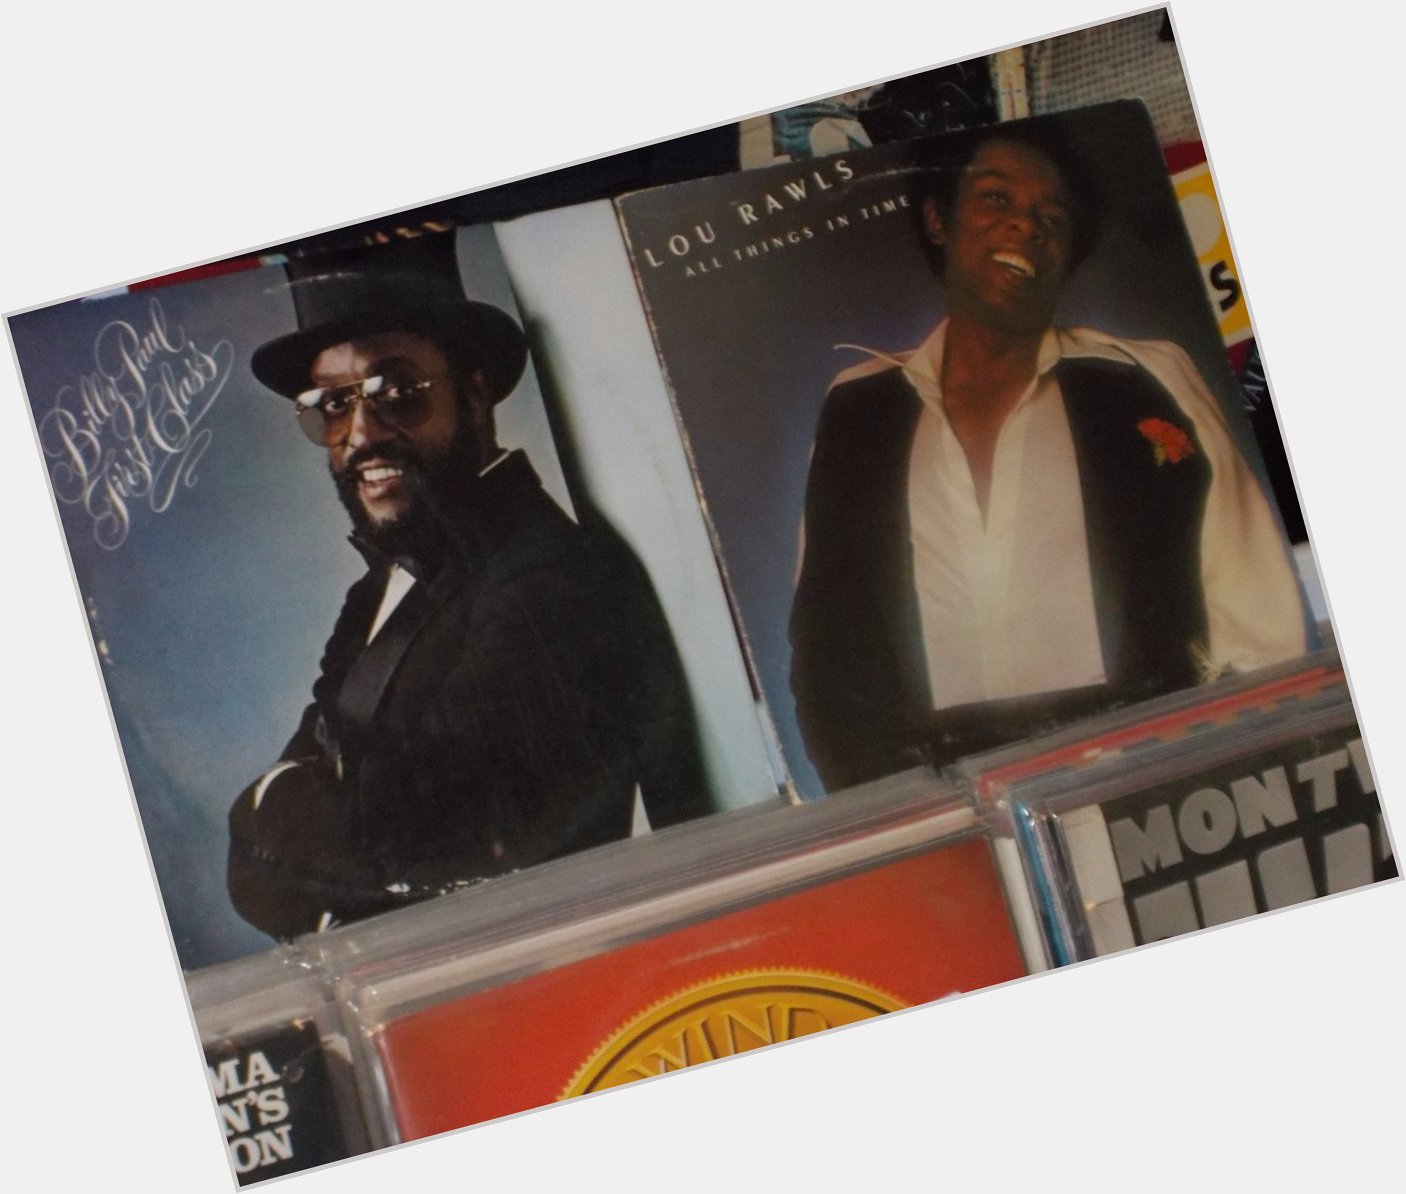 Happy Birthday to the late Billy Paul & the late Lou Rawls 